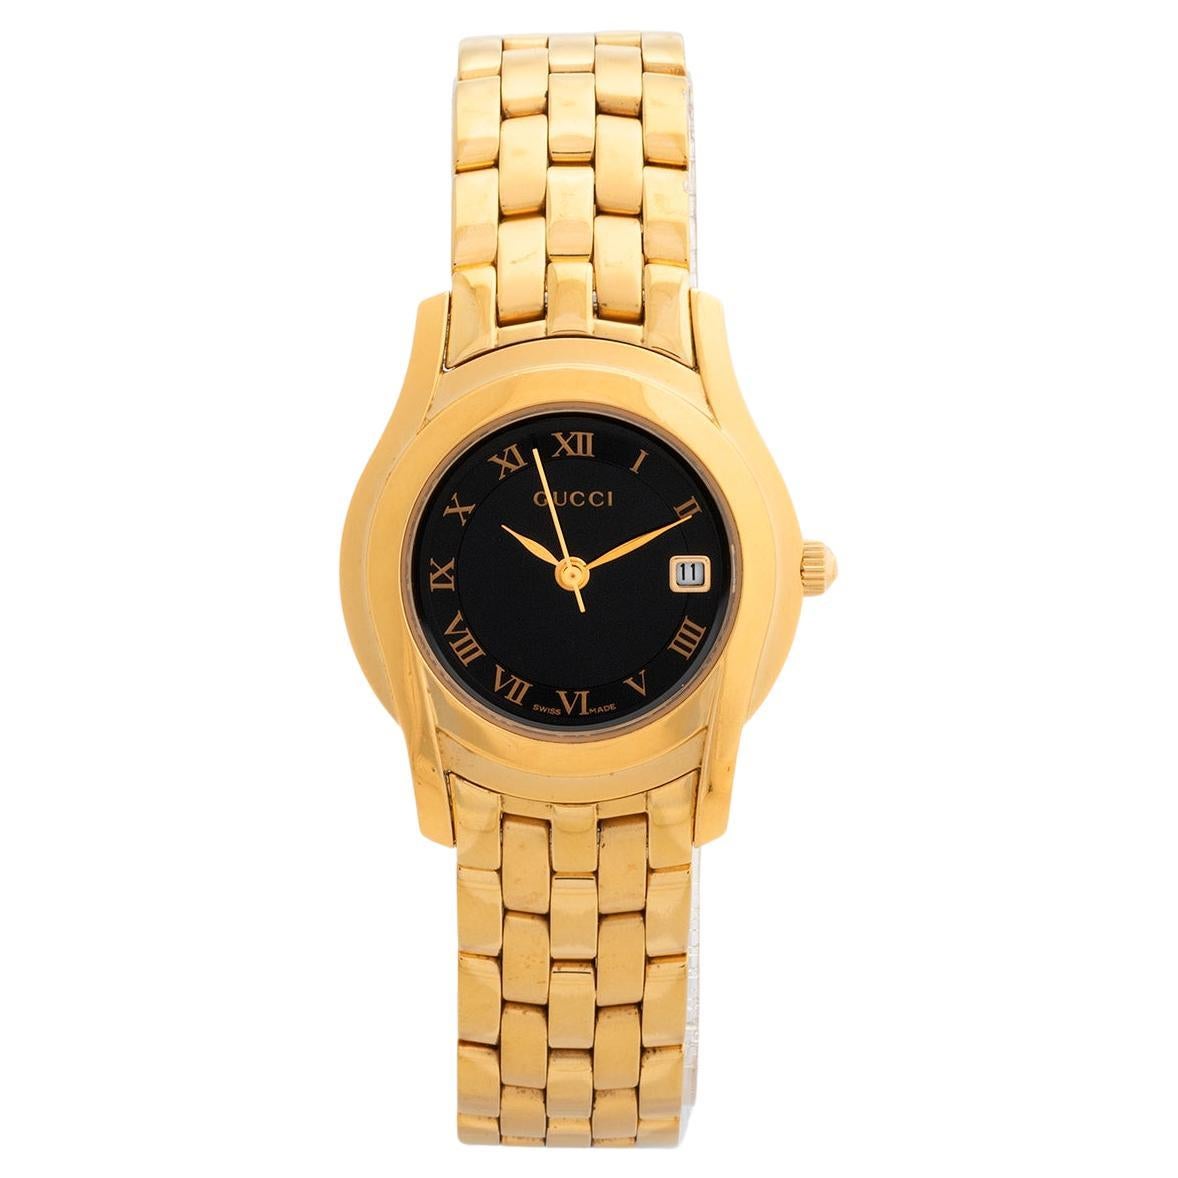 1990's Iconic Gucci 5400L Wristwatch. Heavy Gold Plated. Up to 150mm Wrist.